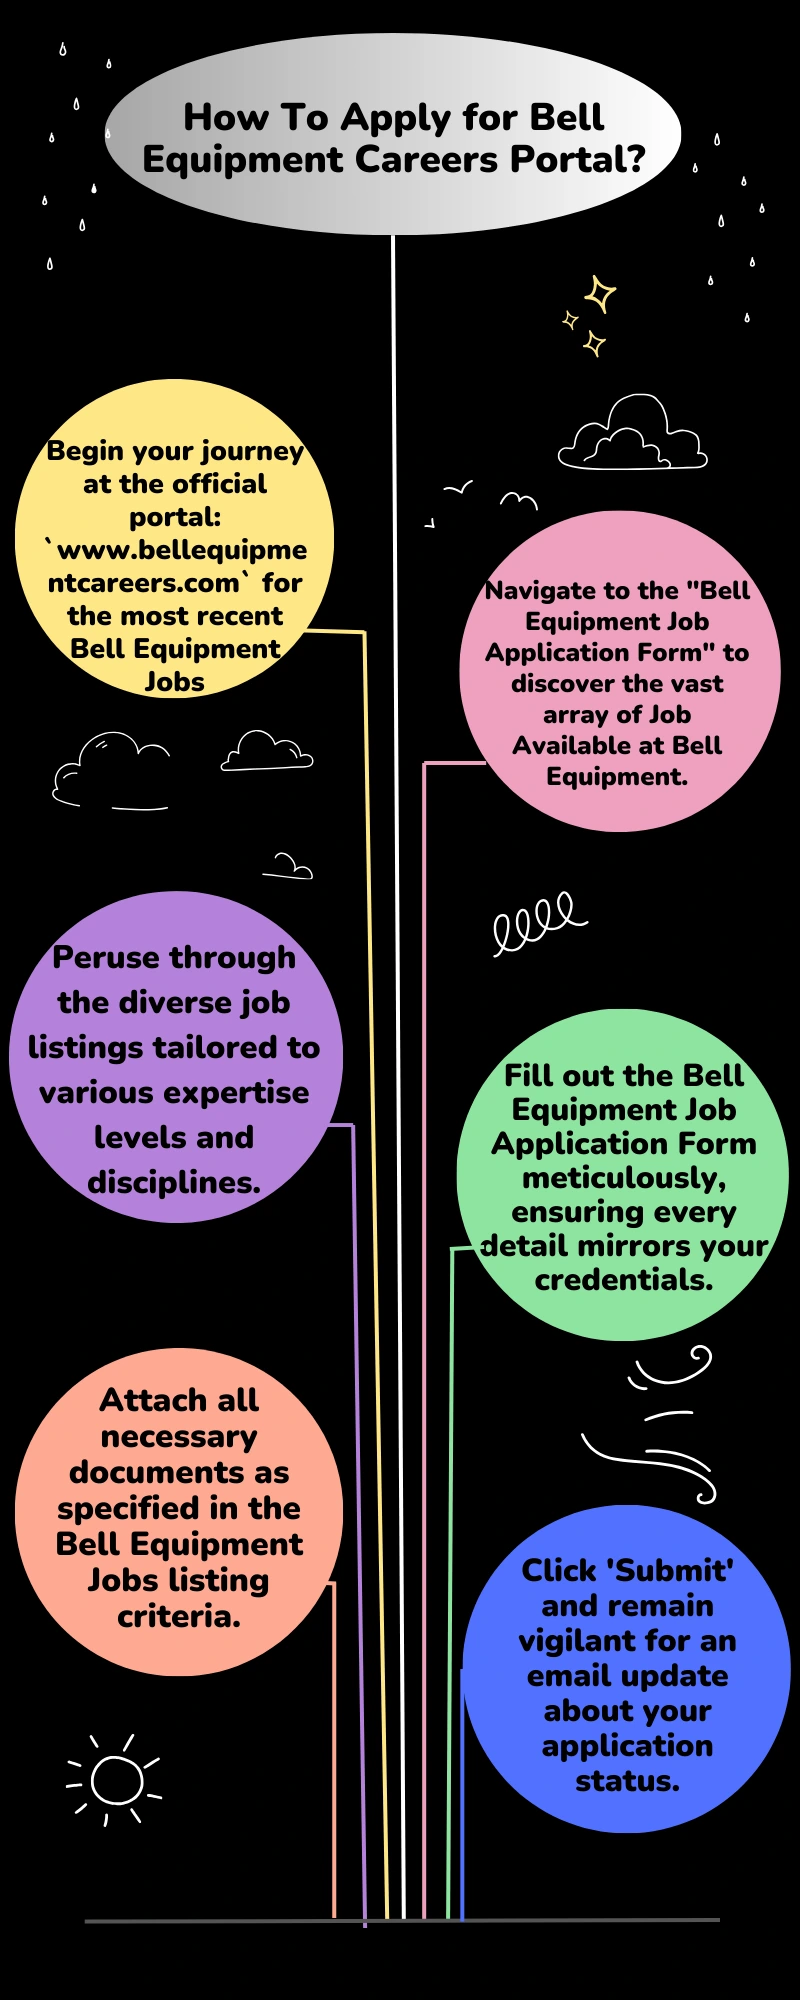 How To Apply for Bell Equipment Careers Portal?